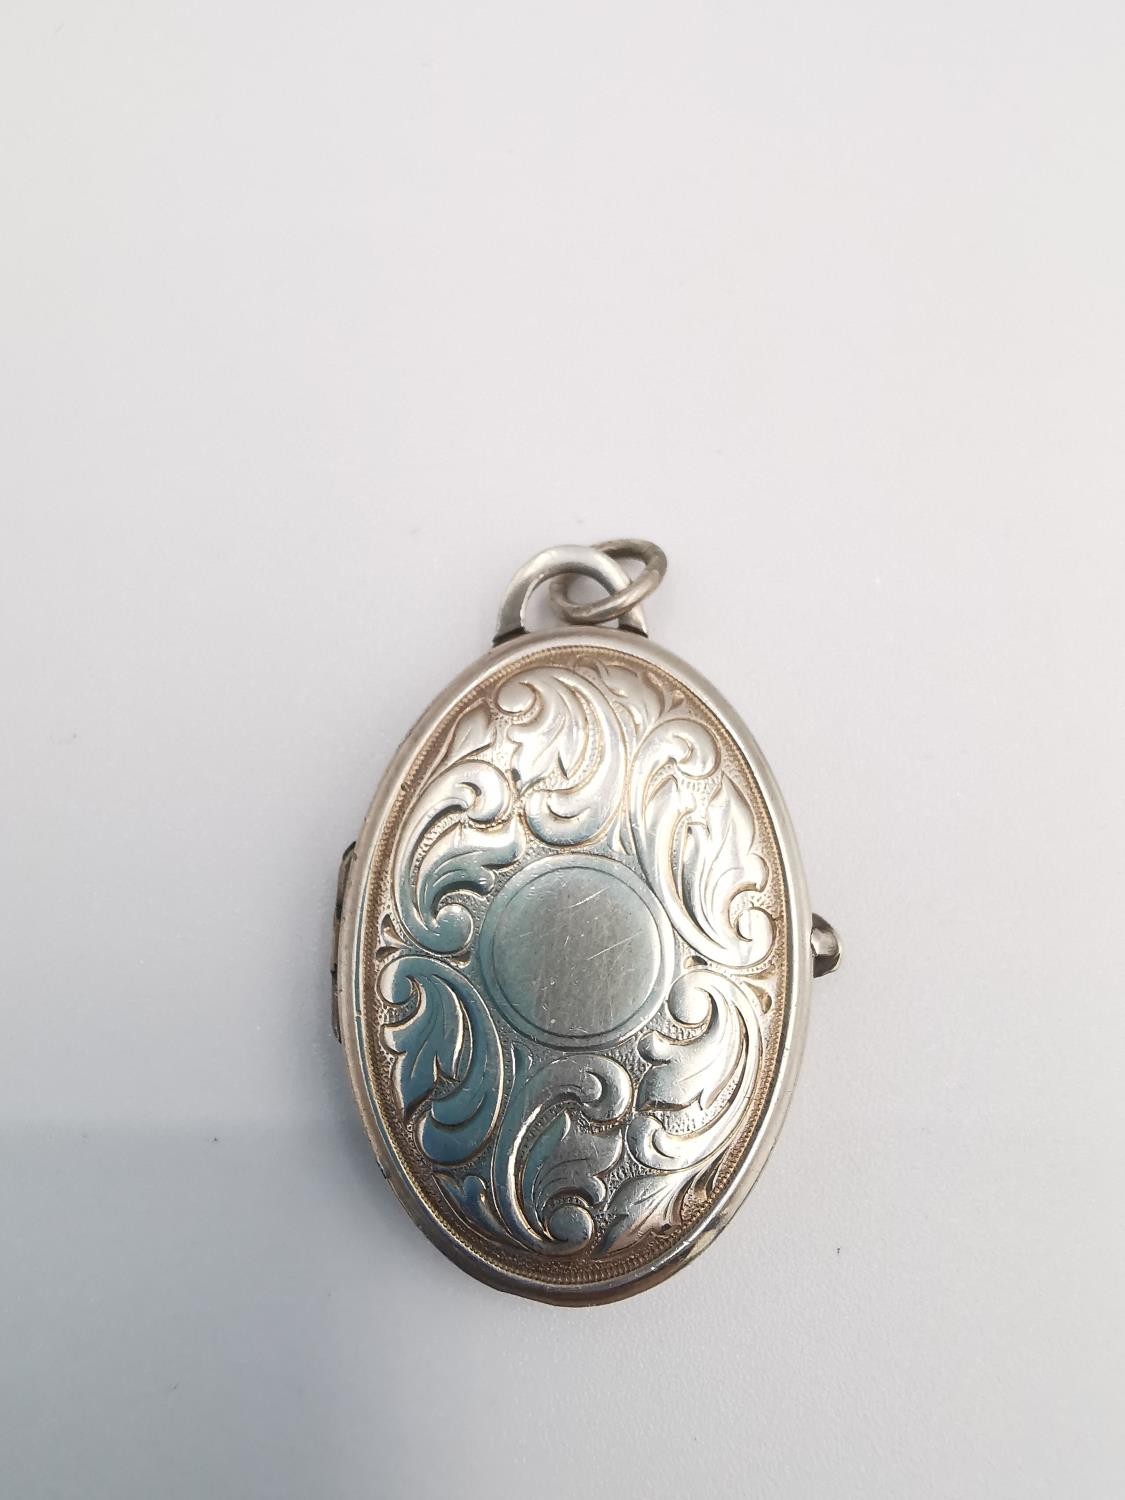 A heavy sterling silver oval locket with stylised scrolling foliate design with cross hatch design - Image 5 of 8